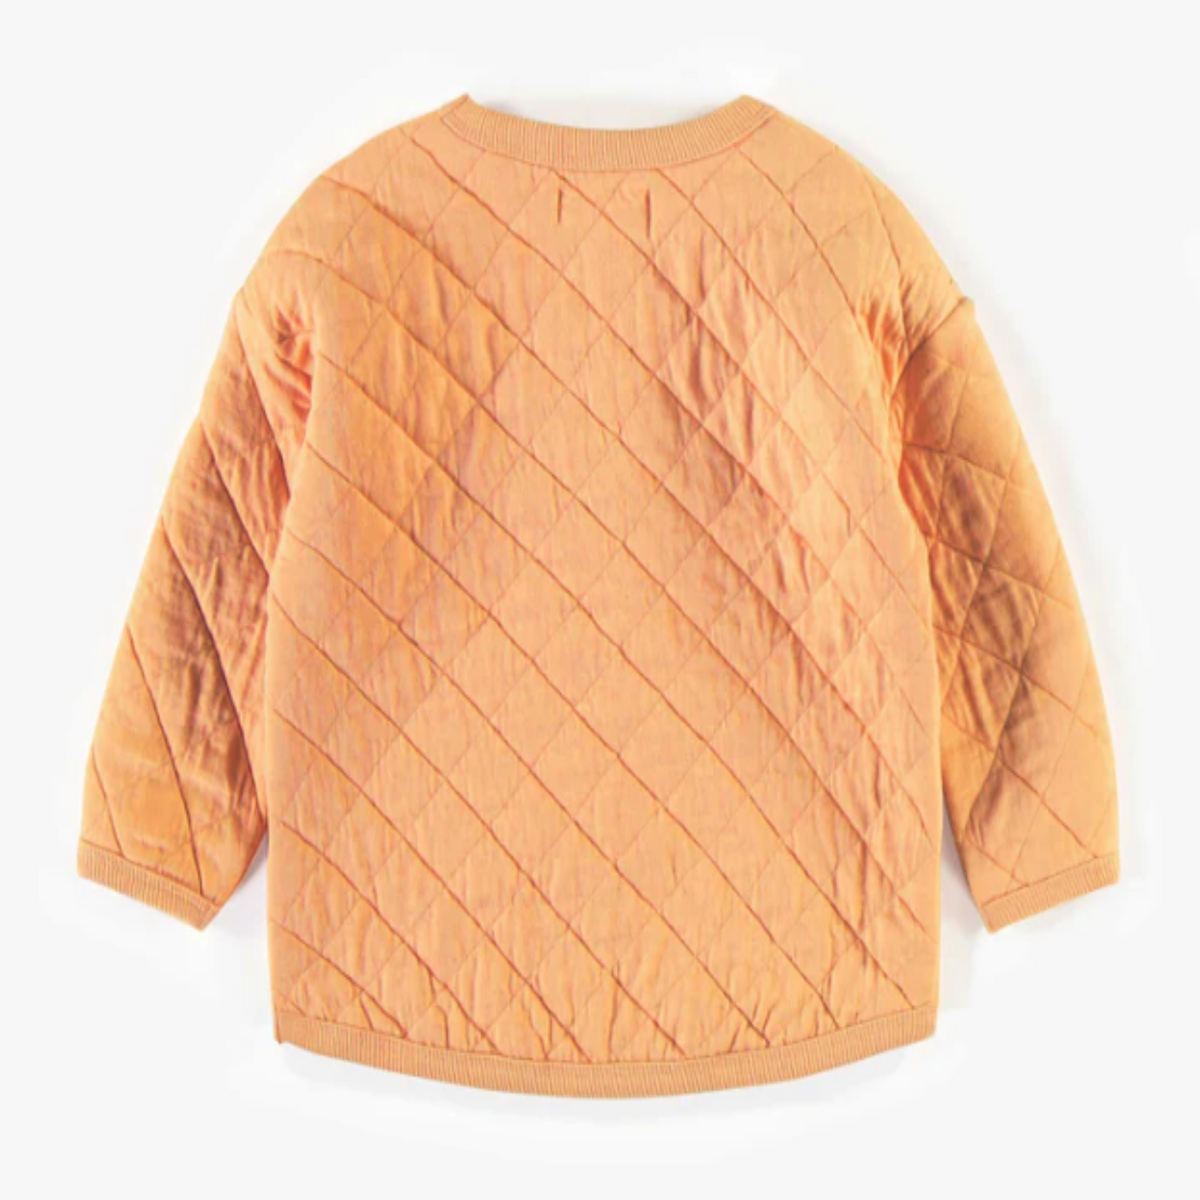 Orange sweater in quilted jersey